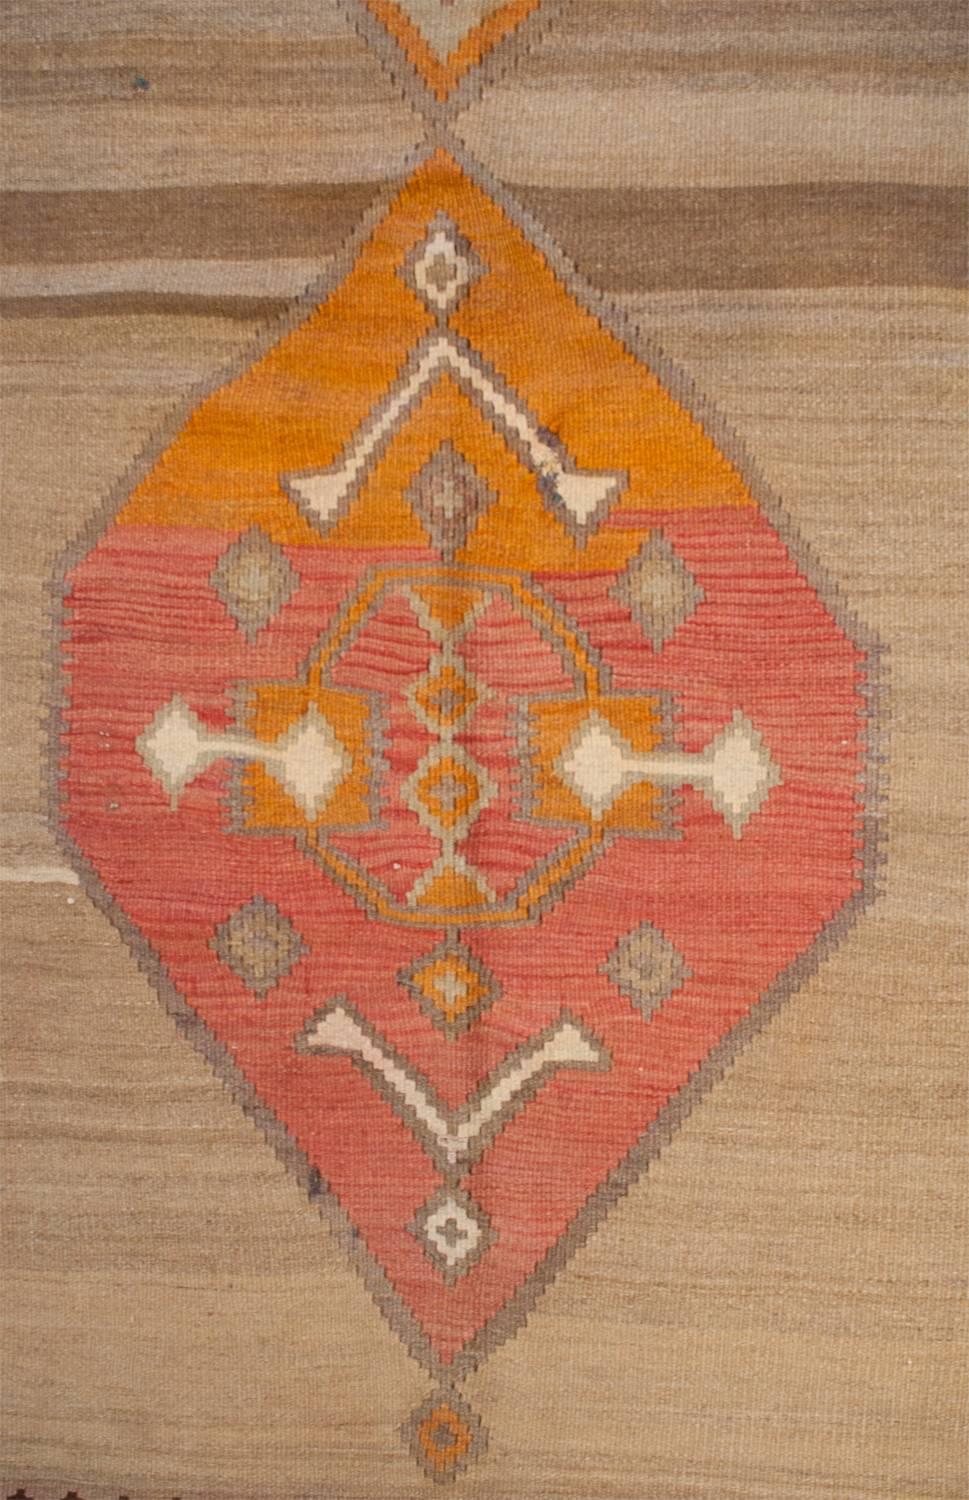 A fantastic early 20th century Shahsavan Kilim rug with two wonderful diamond medallions. One is woven in a brilliant salmon and rust orange dyed wool. The other is woven with the same rust orange highlighting some of the geometric designs. The